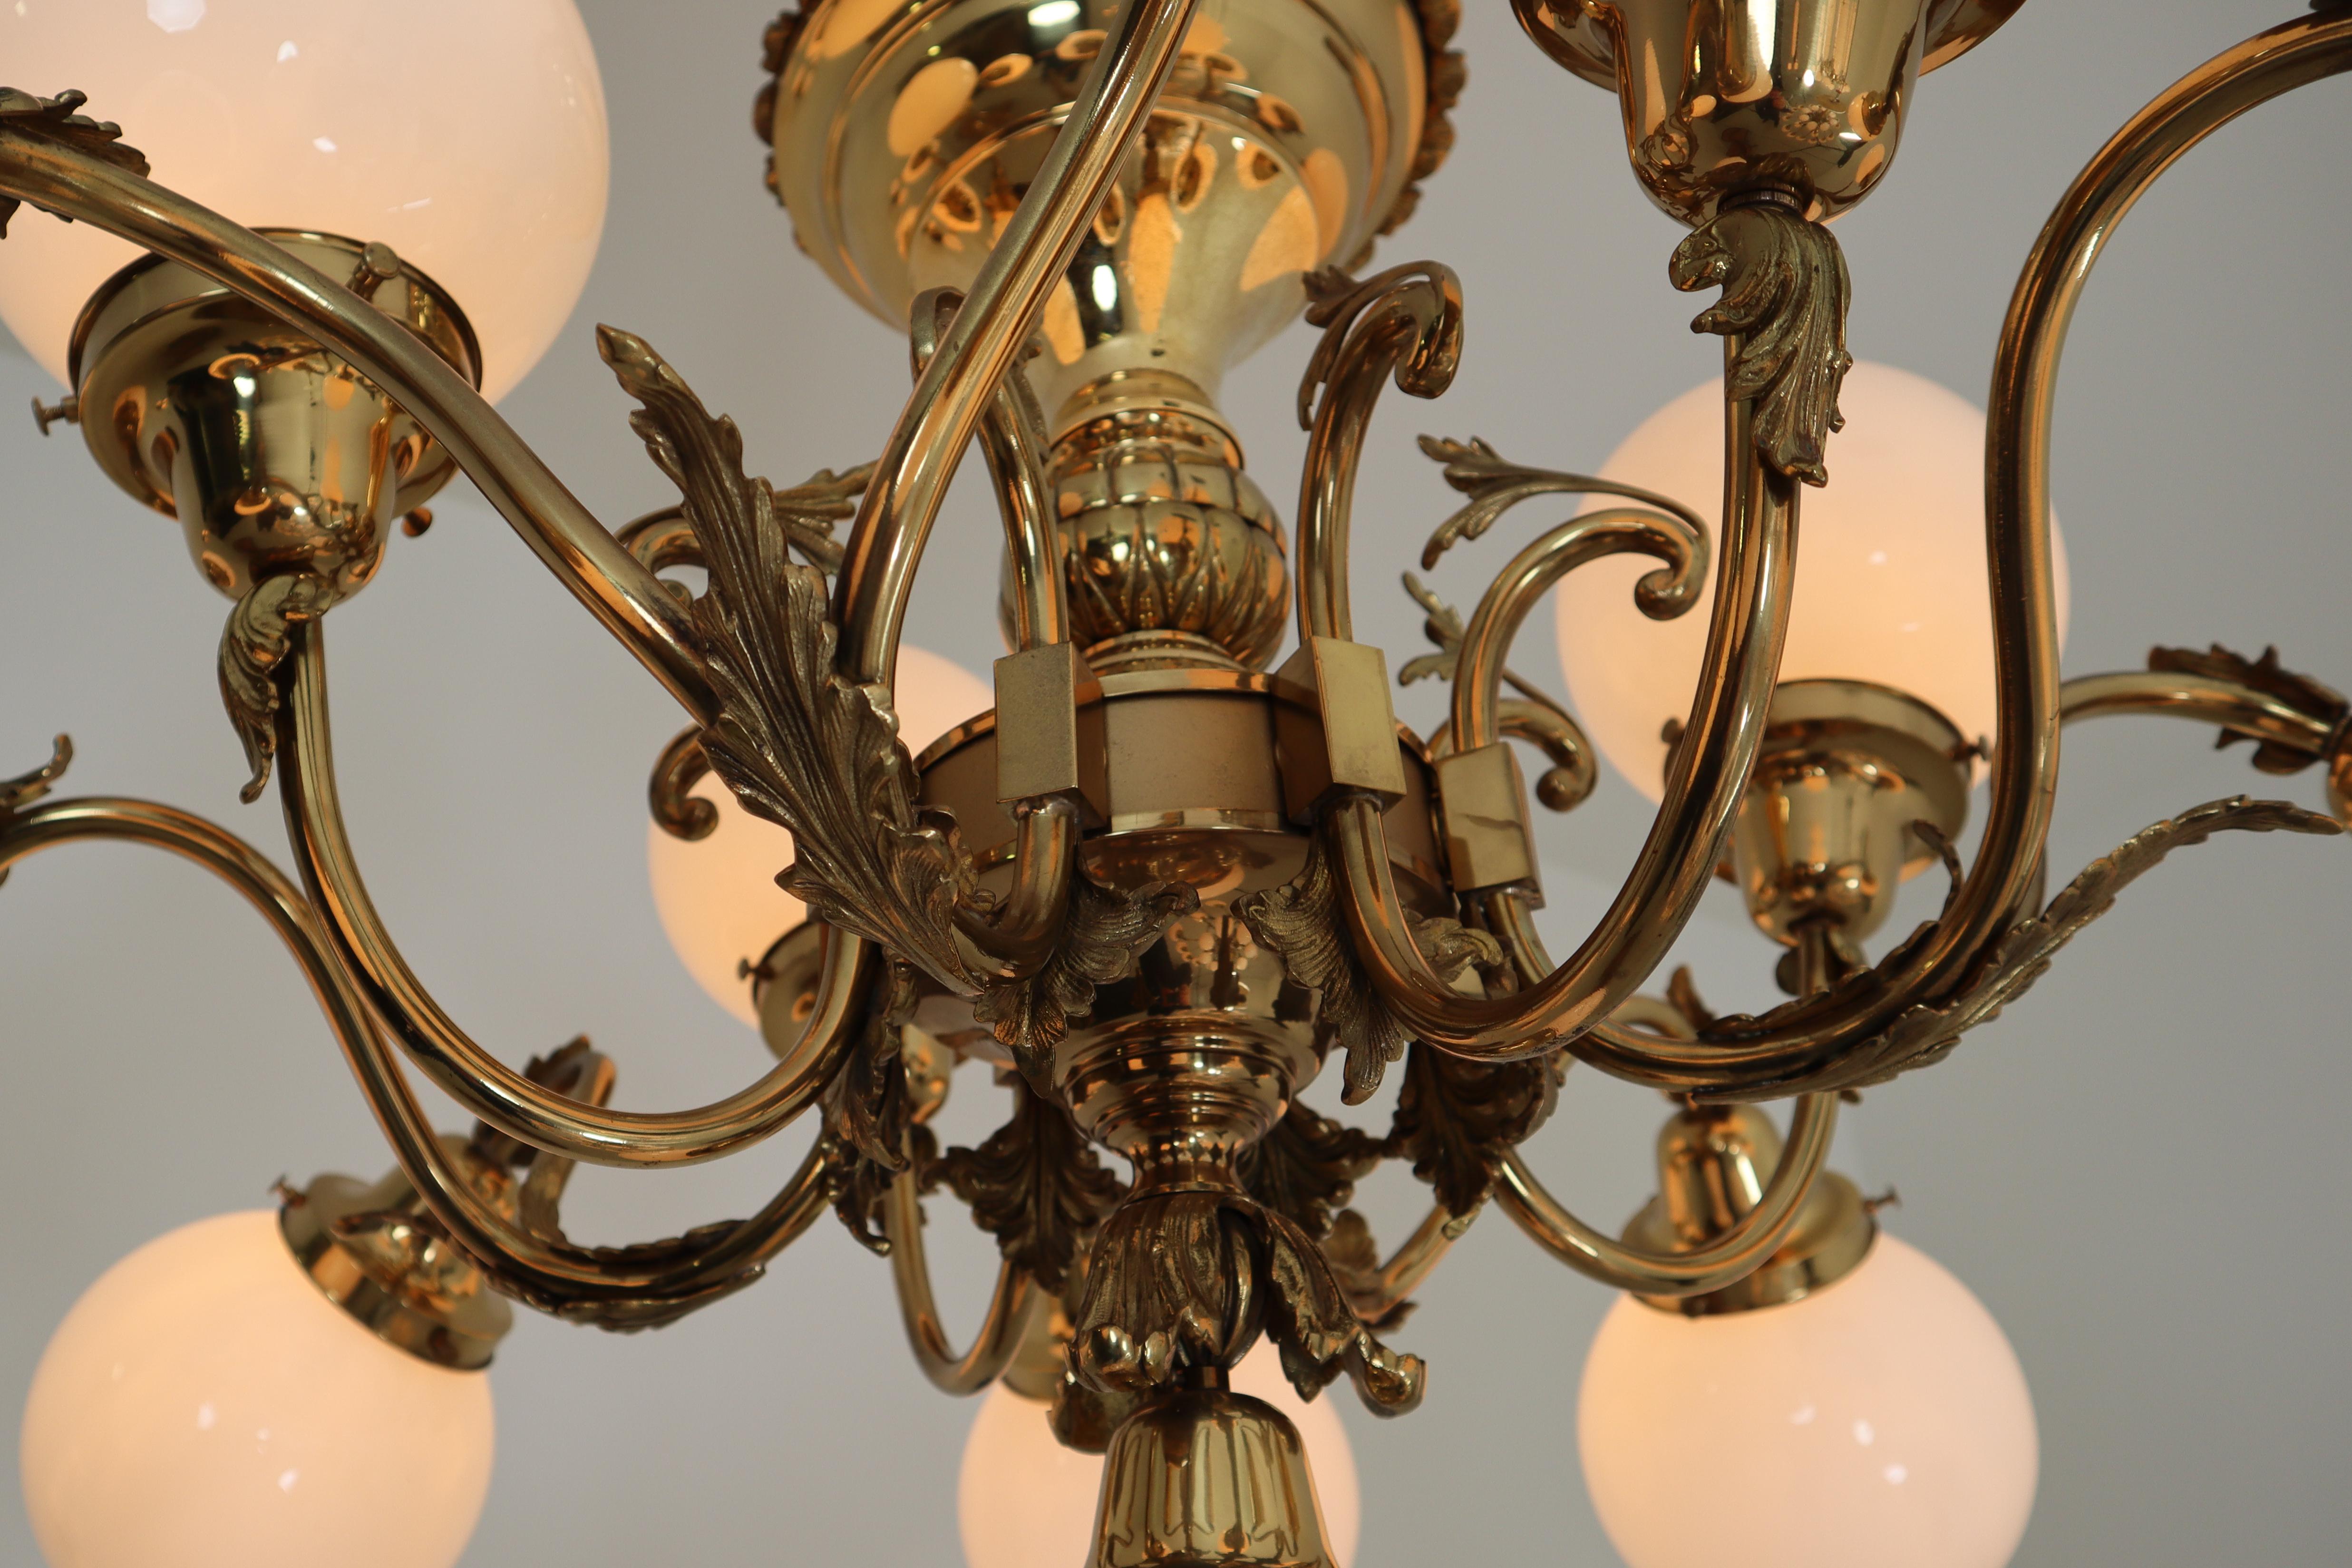 20th Century Monumental Brass Chandeliers with Opaline Glass Globes, National Gallery Praque